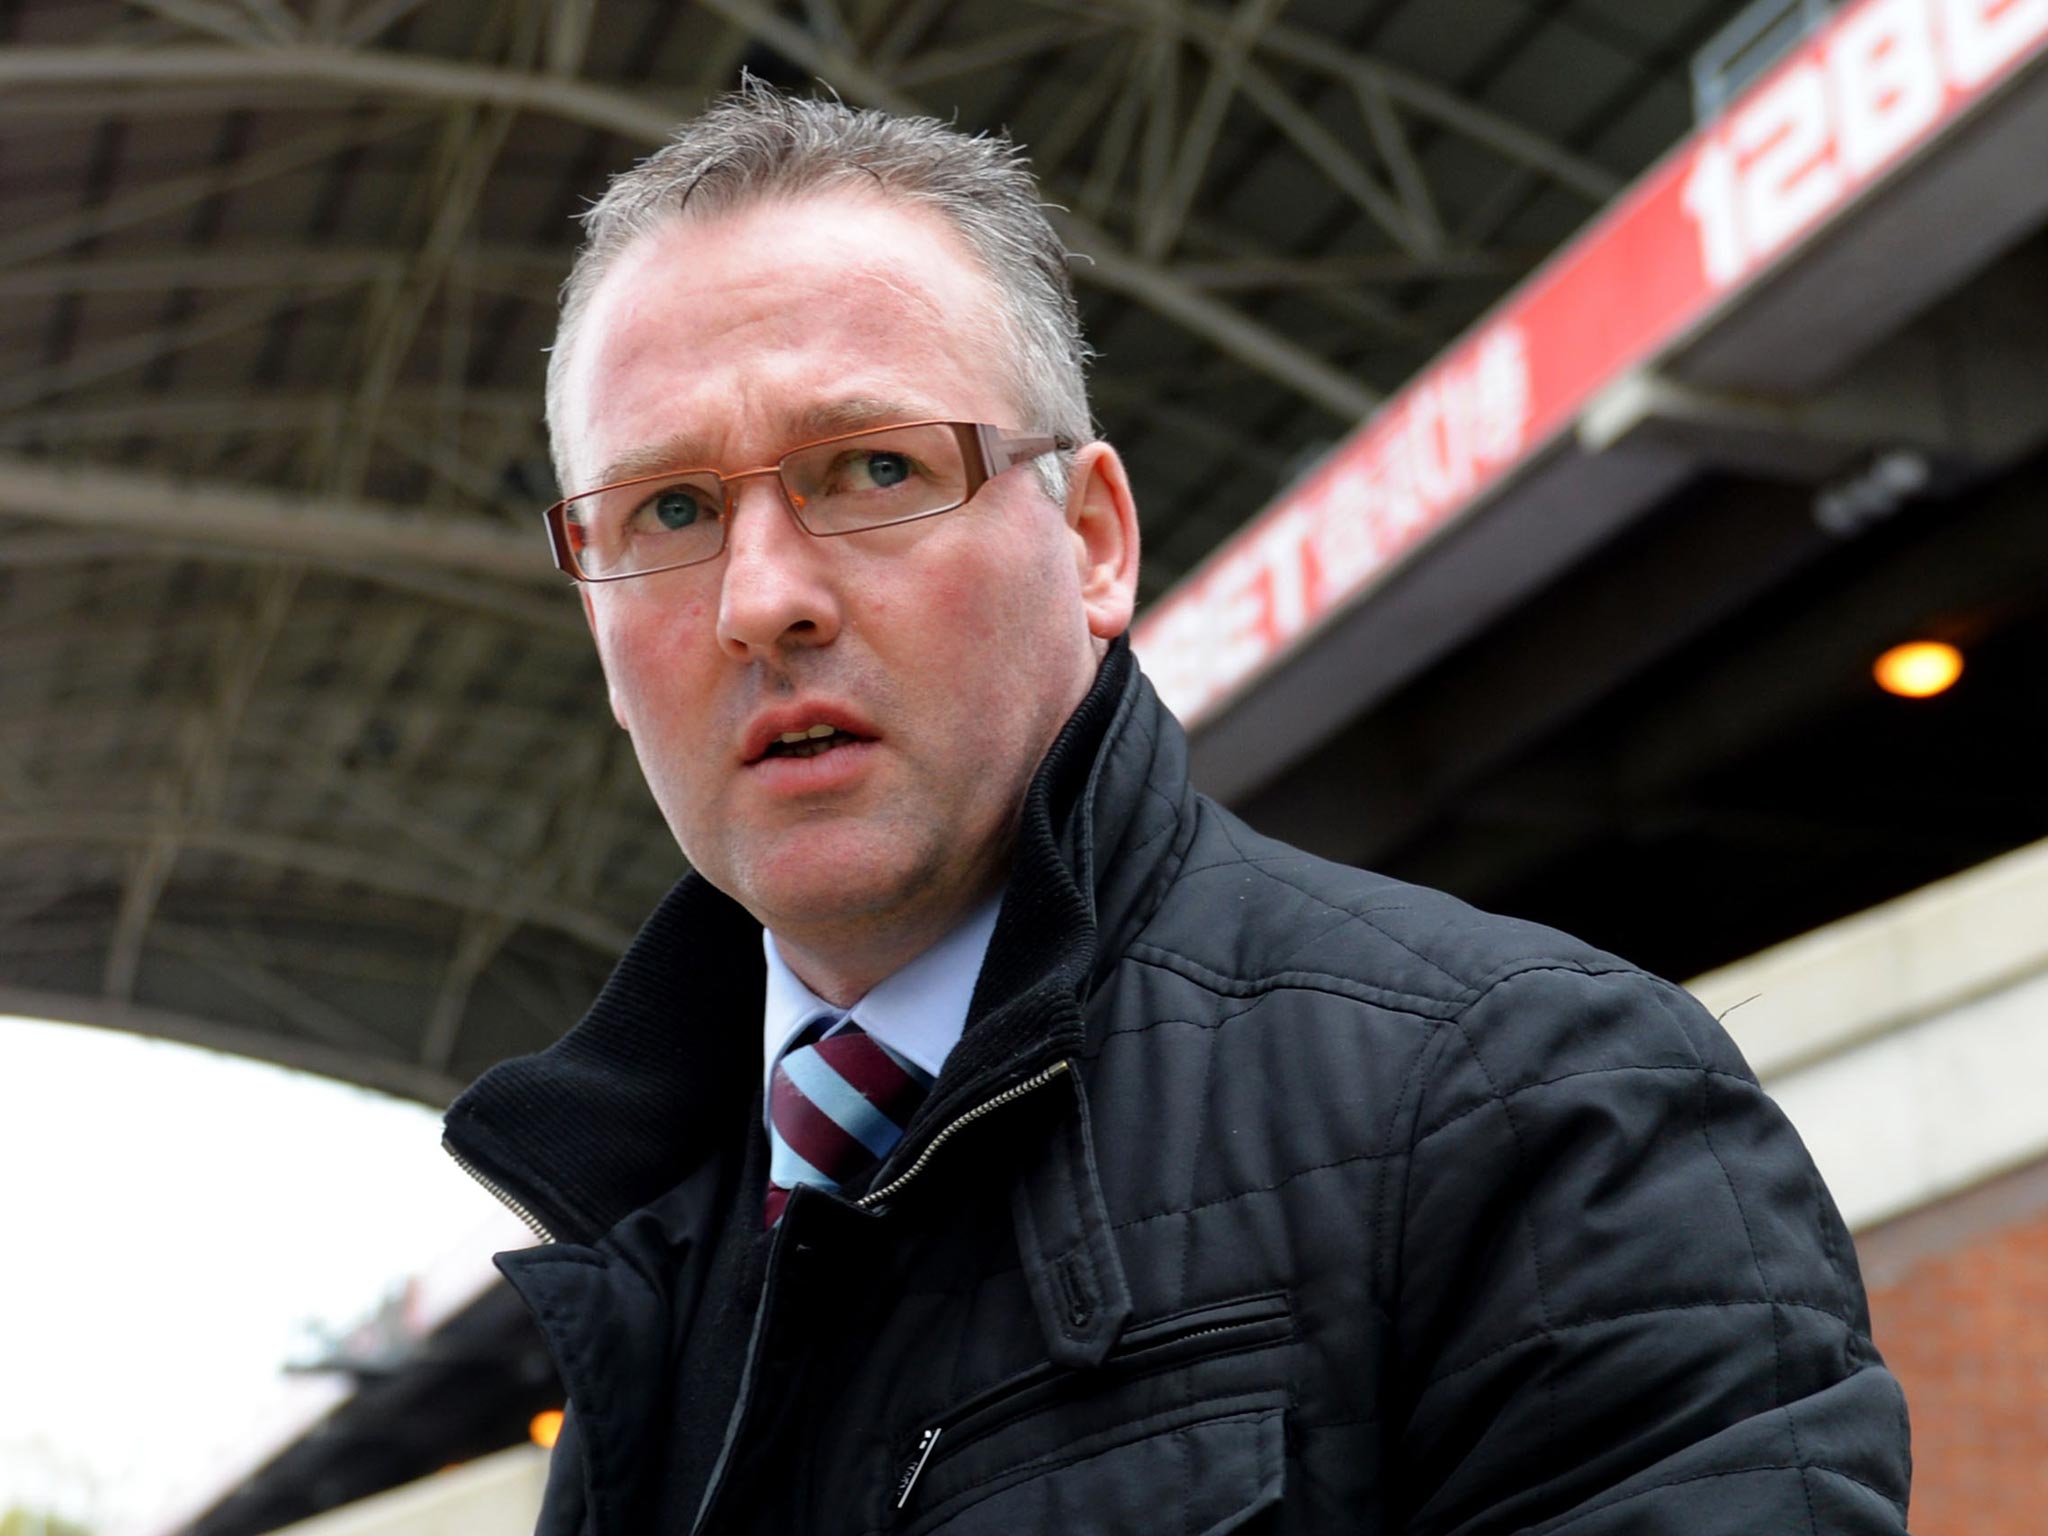 Paul Lambert looks on from the dugout